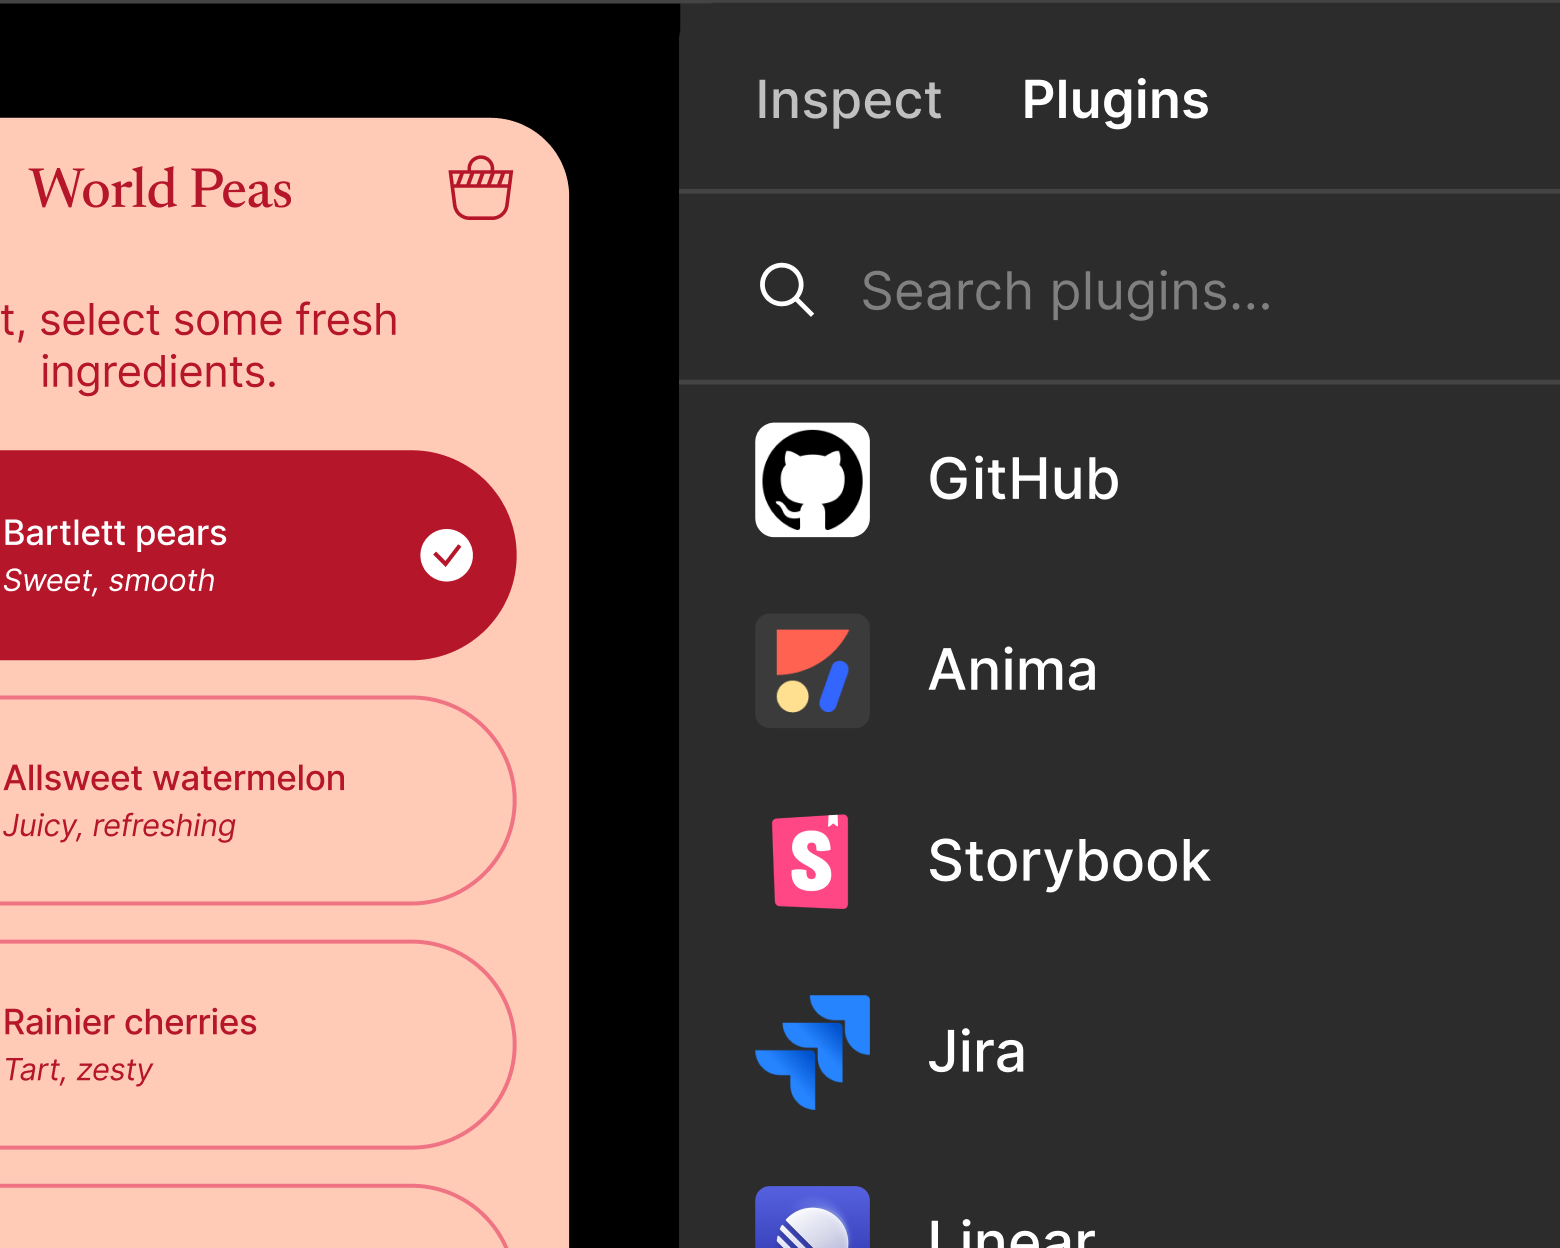 The plugins view showing how you can search for plugins and find plugins like GitHub, Anima, Storybook, Jira, and Linear